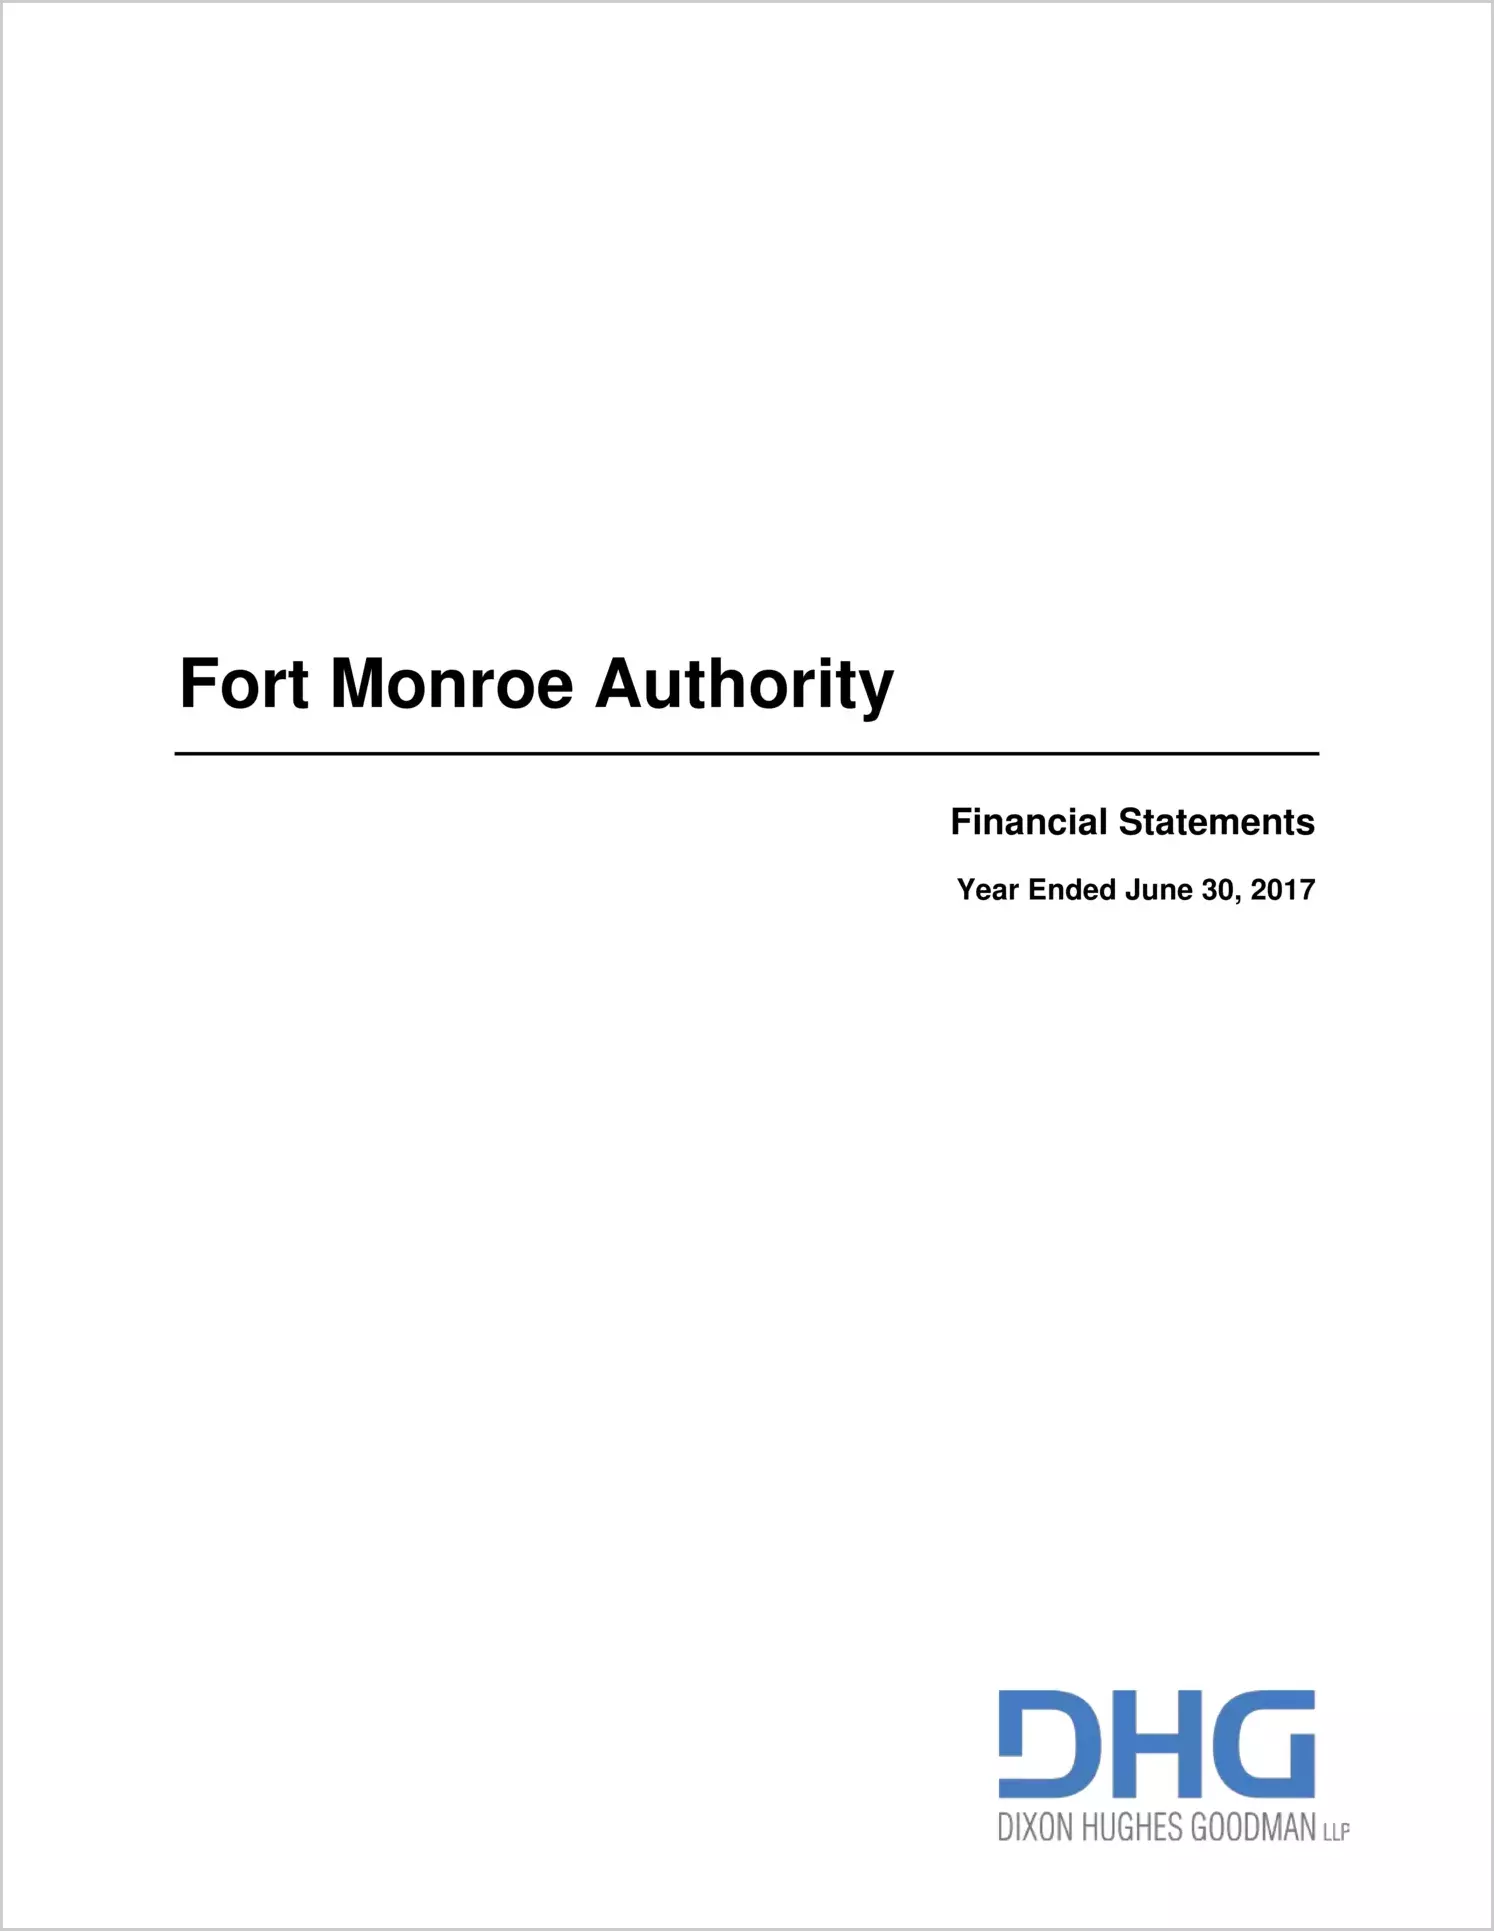 Fort Monroe Authority for the year ended June 30, 2017